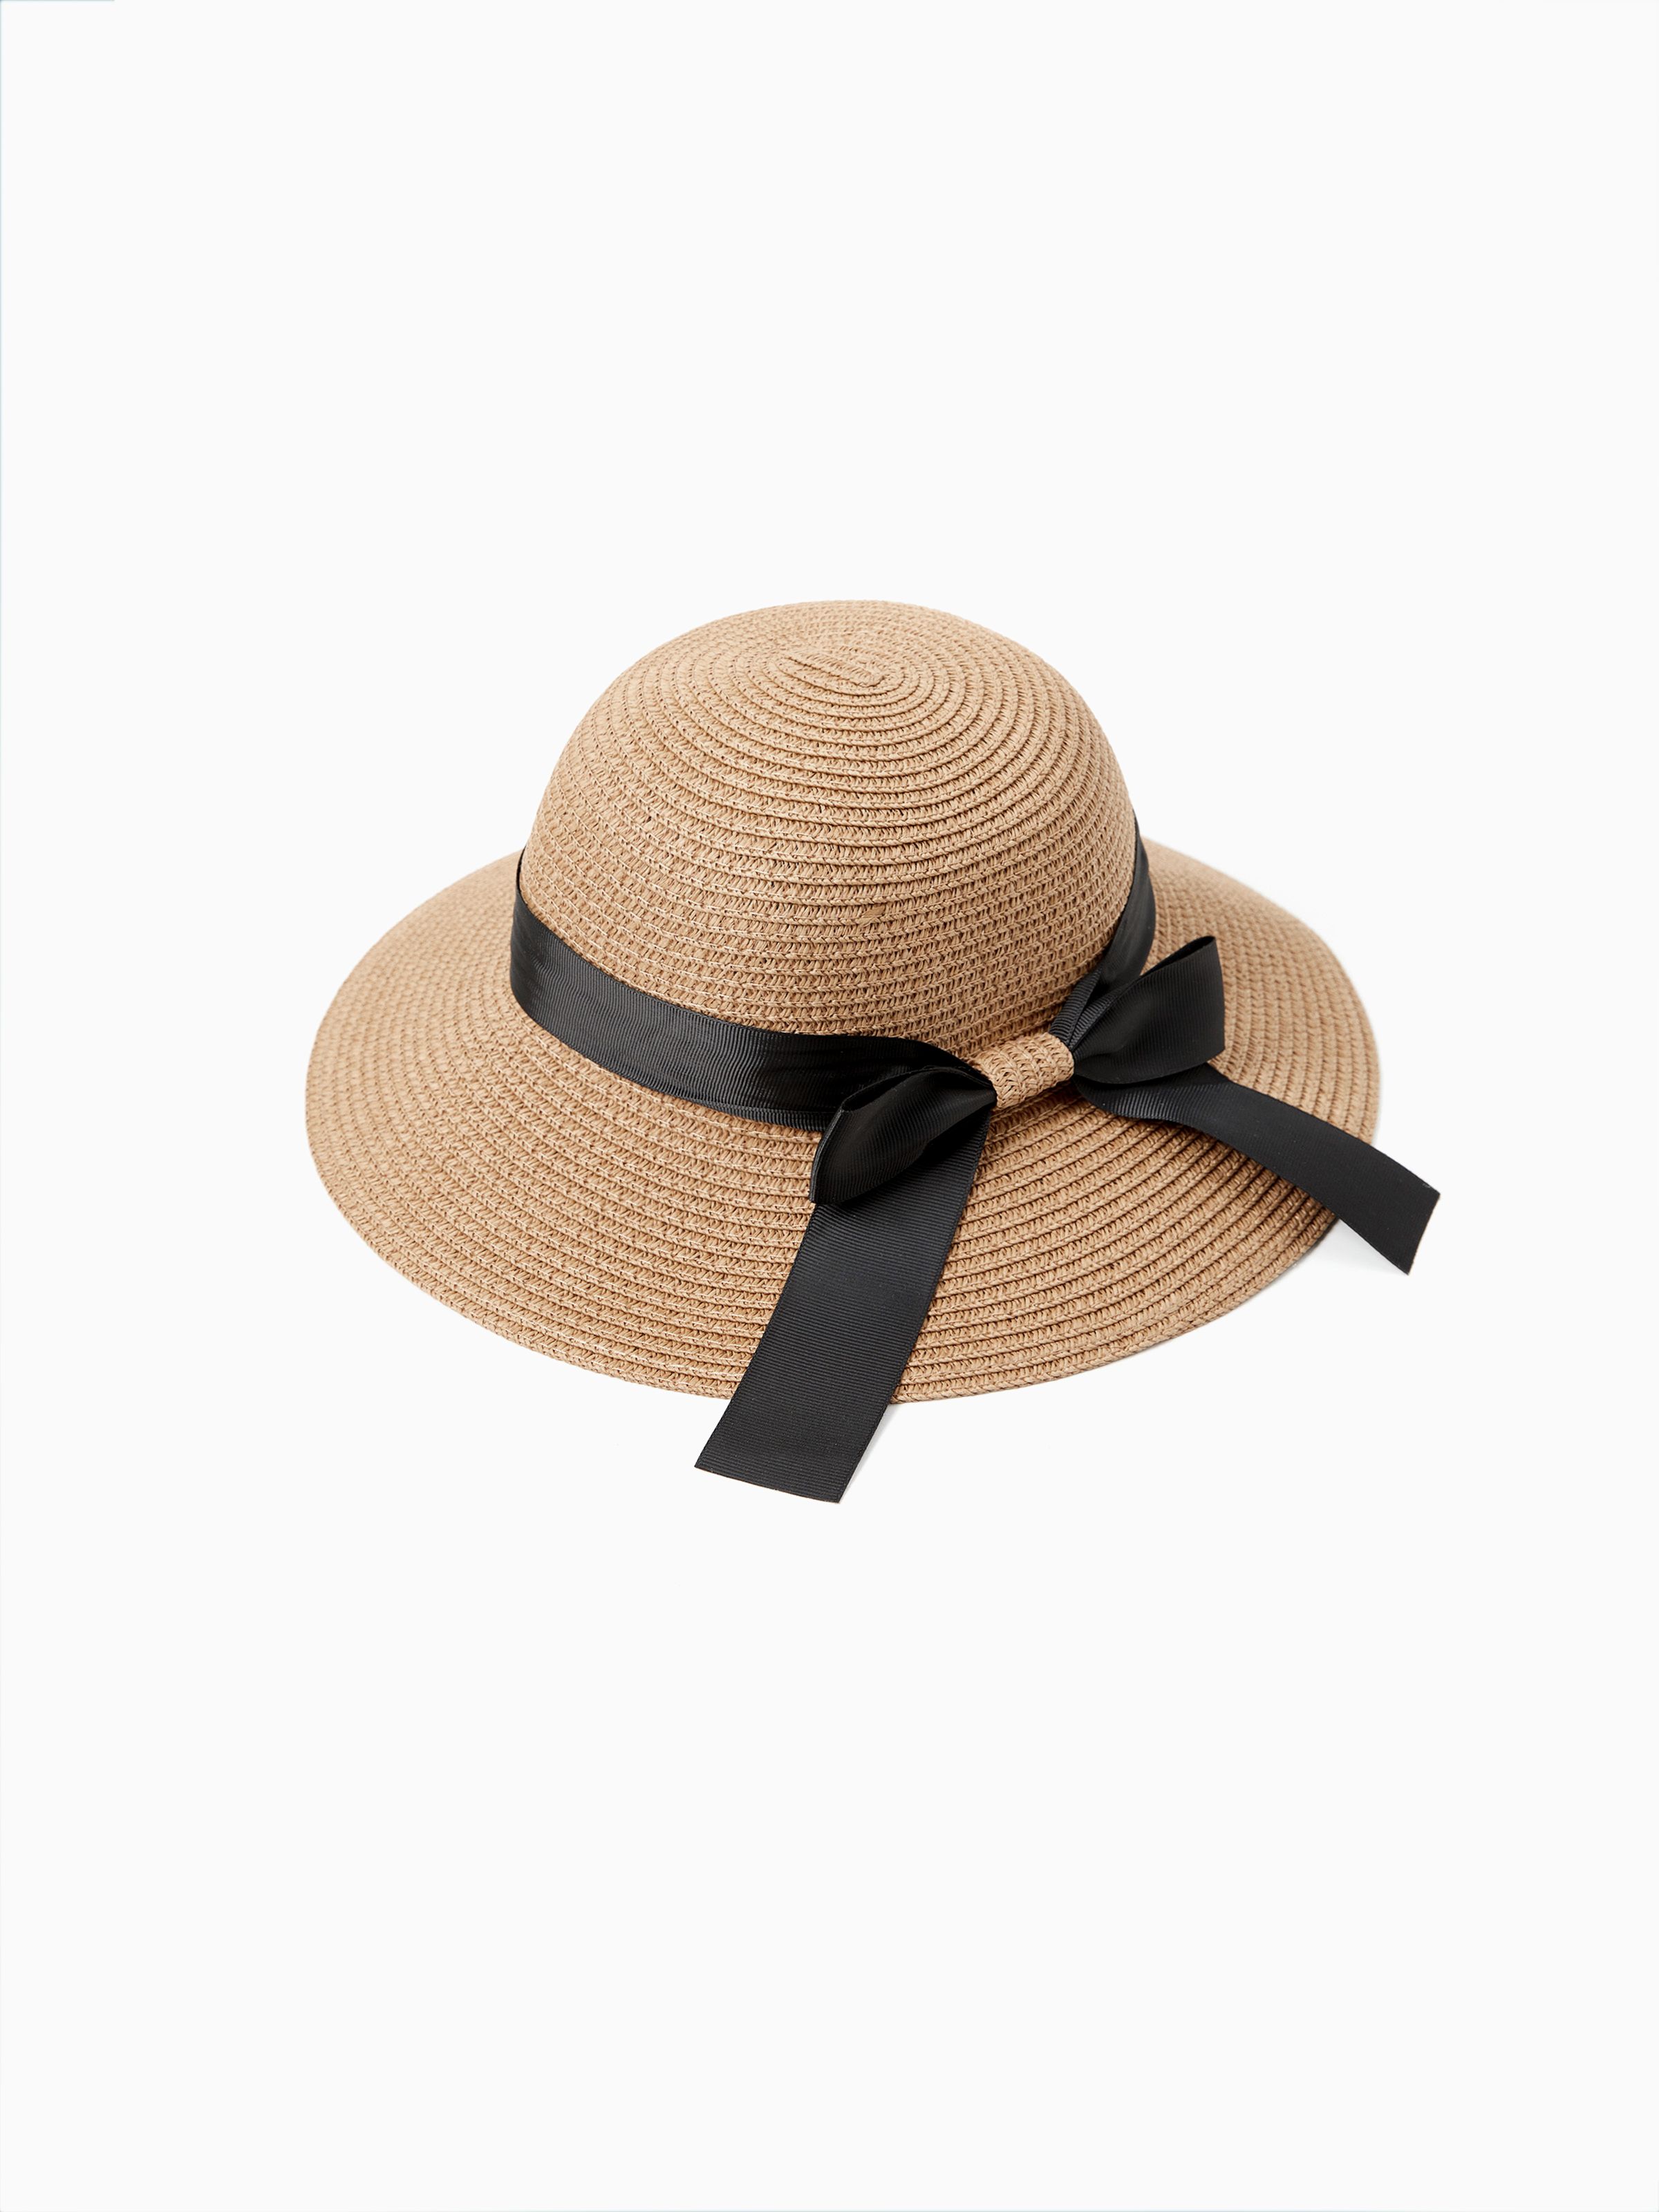 

Mommy and Me Straw Bow Tie Beach Vacation Hats